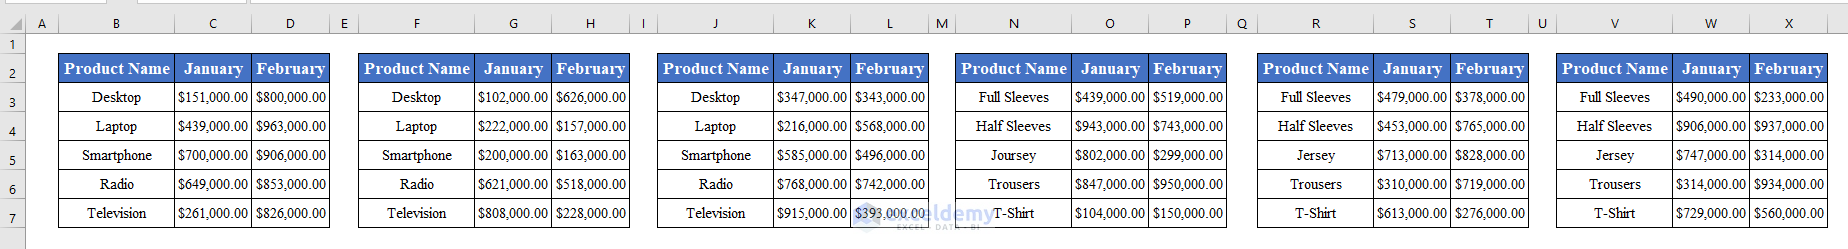 Output to Combine Multiple Excel Files into One Worksheet Using a Macro